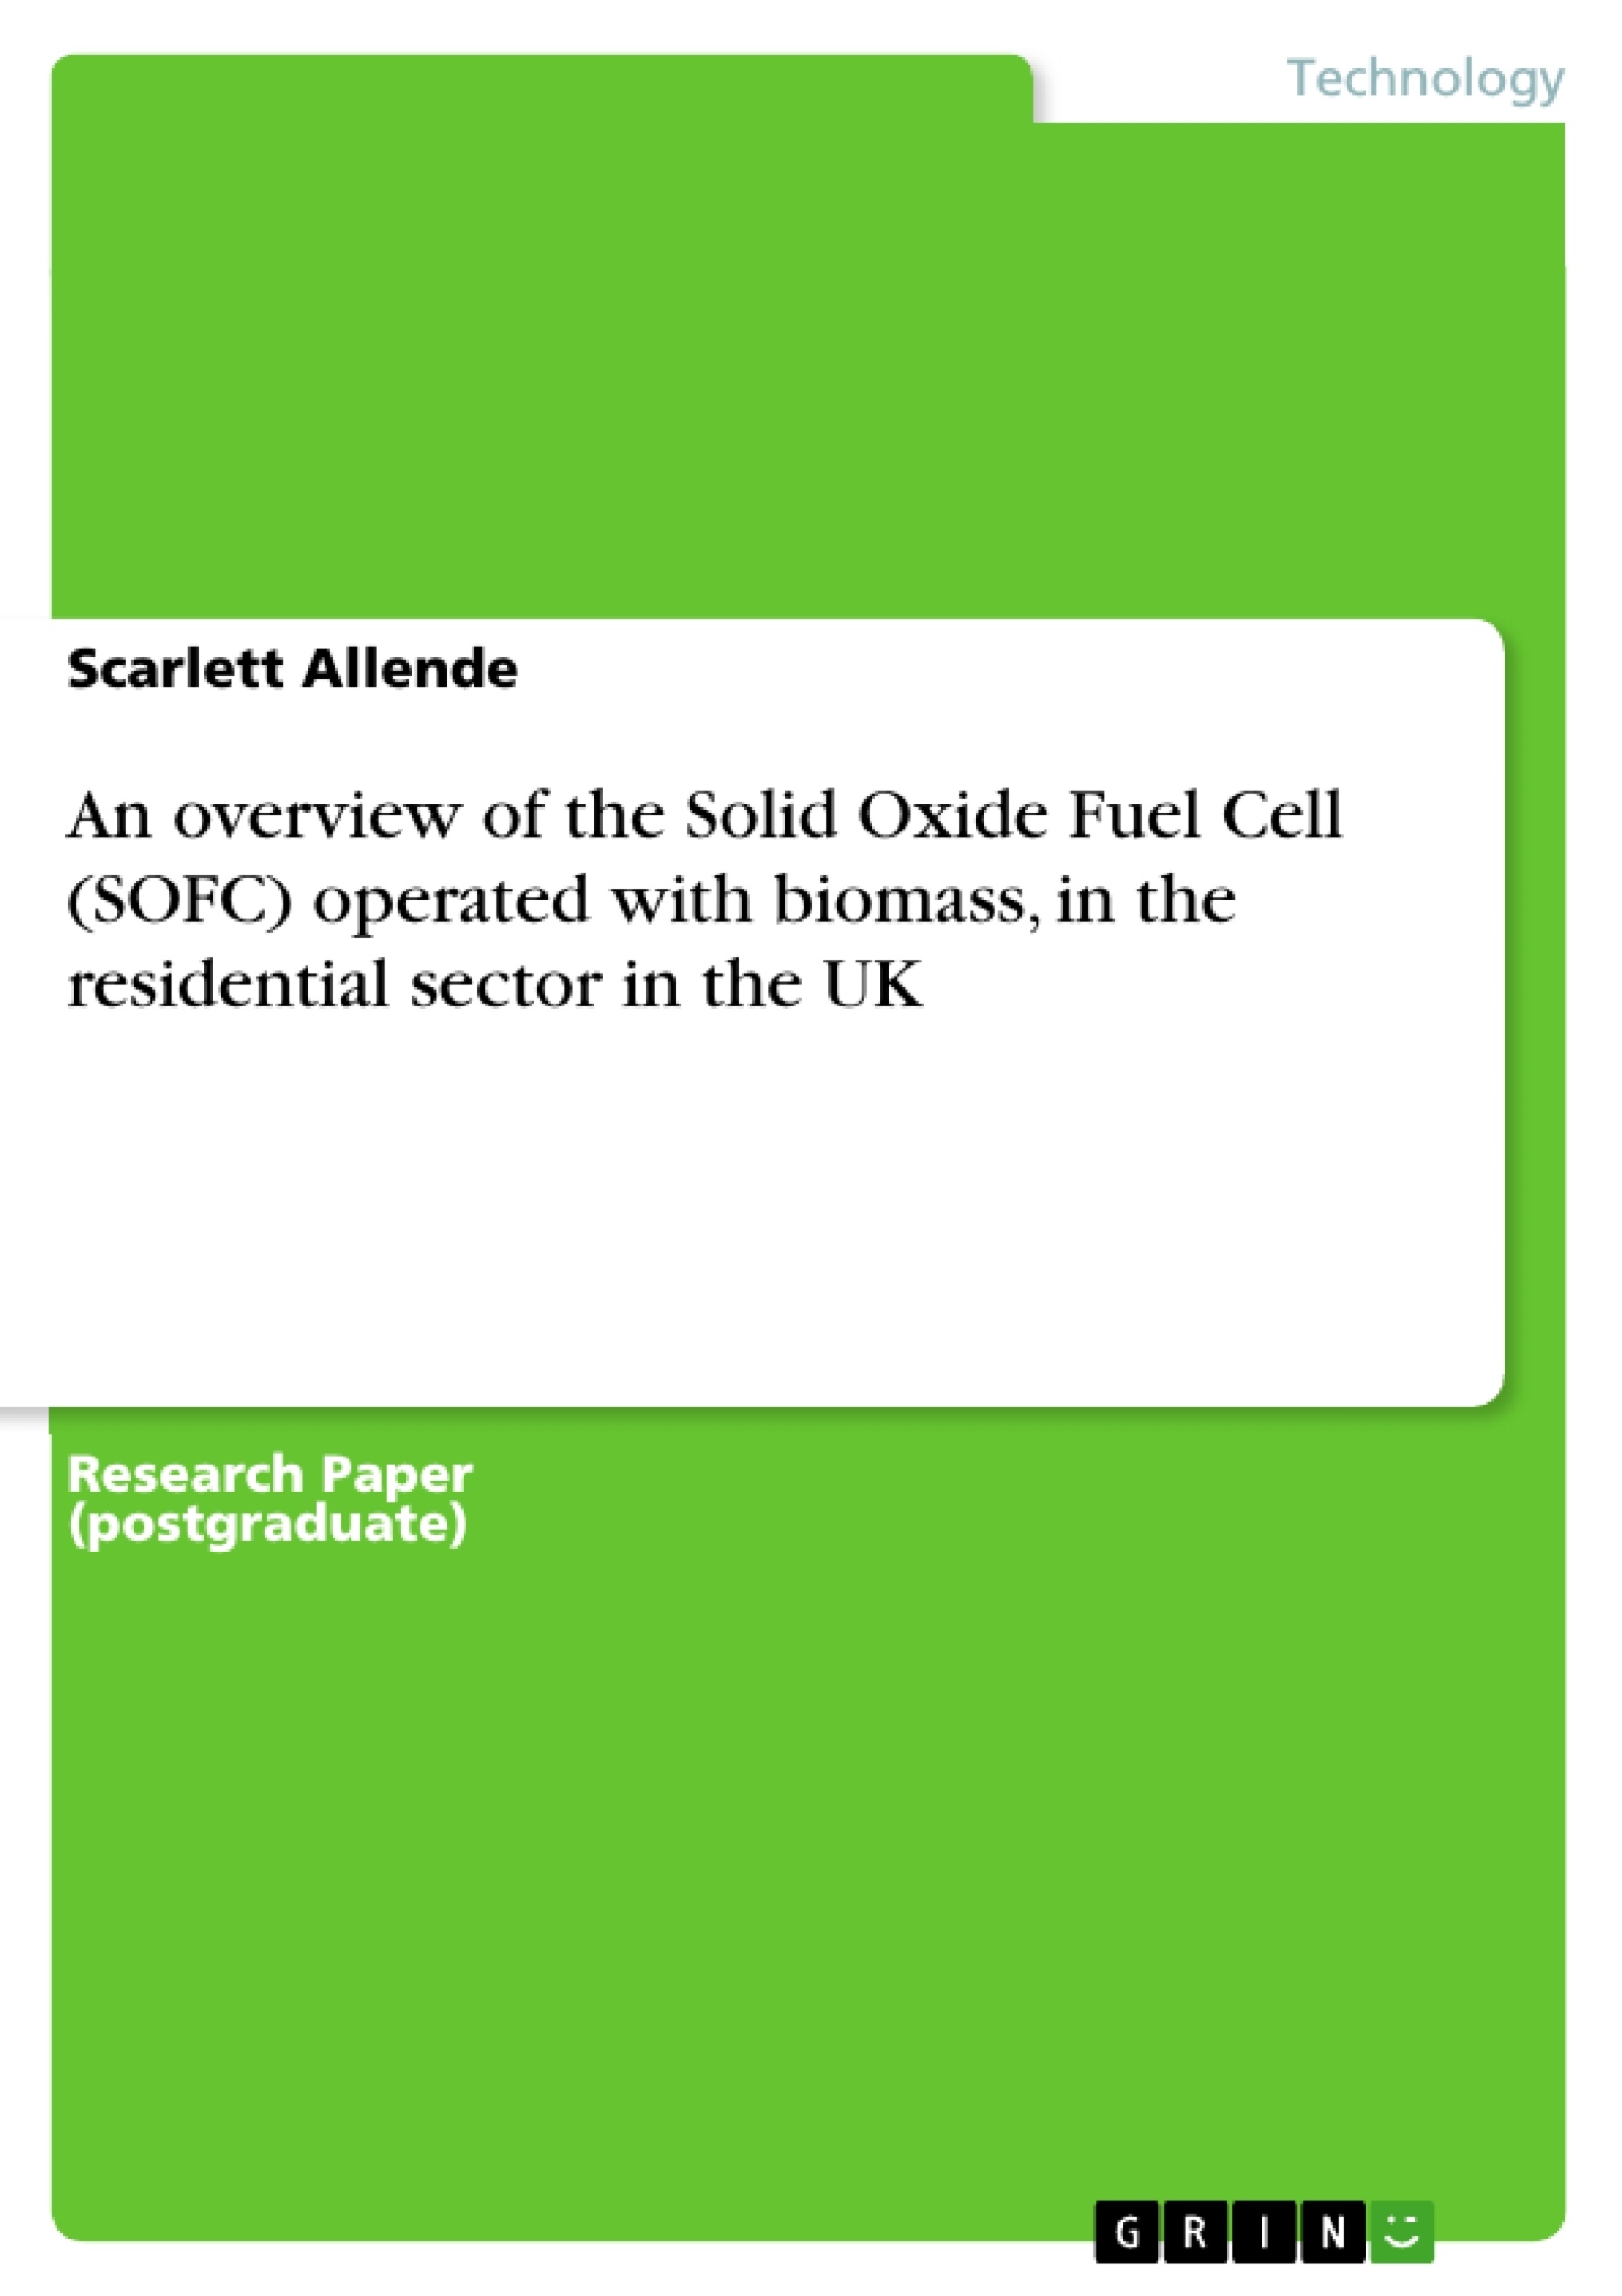 Título: An overview of the Solid Oxide Fuel Cell (SOFC) operated with biomass, in the residential sector in the UK